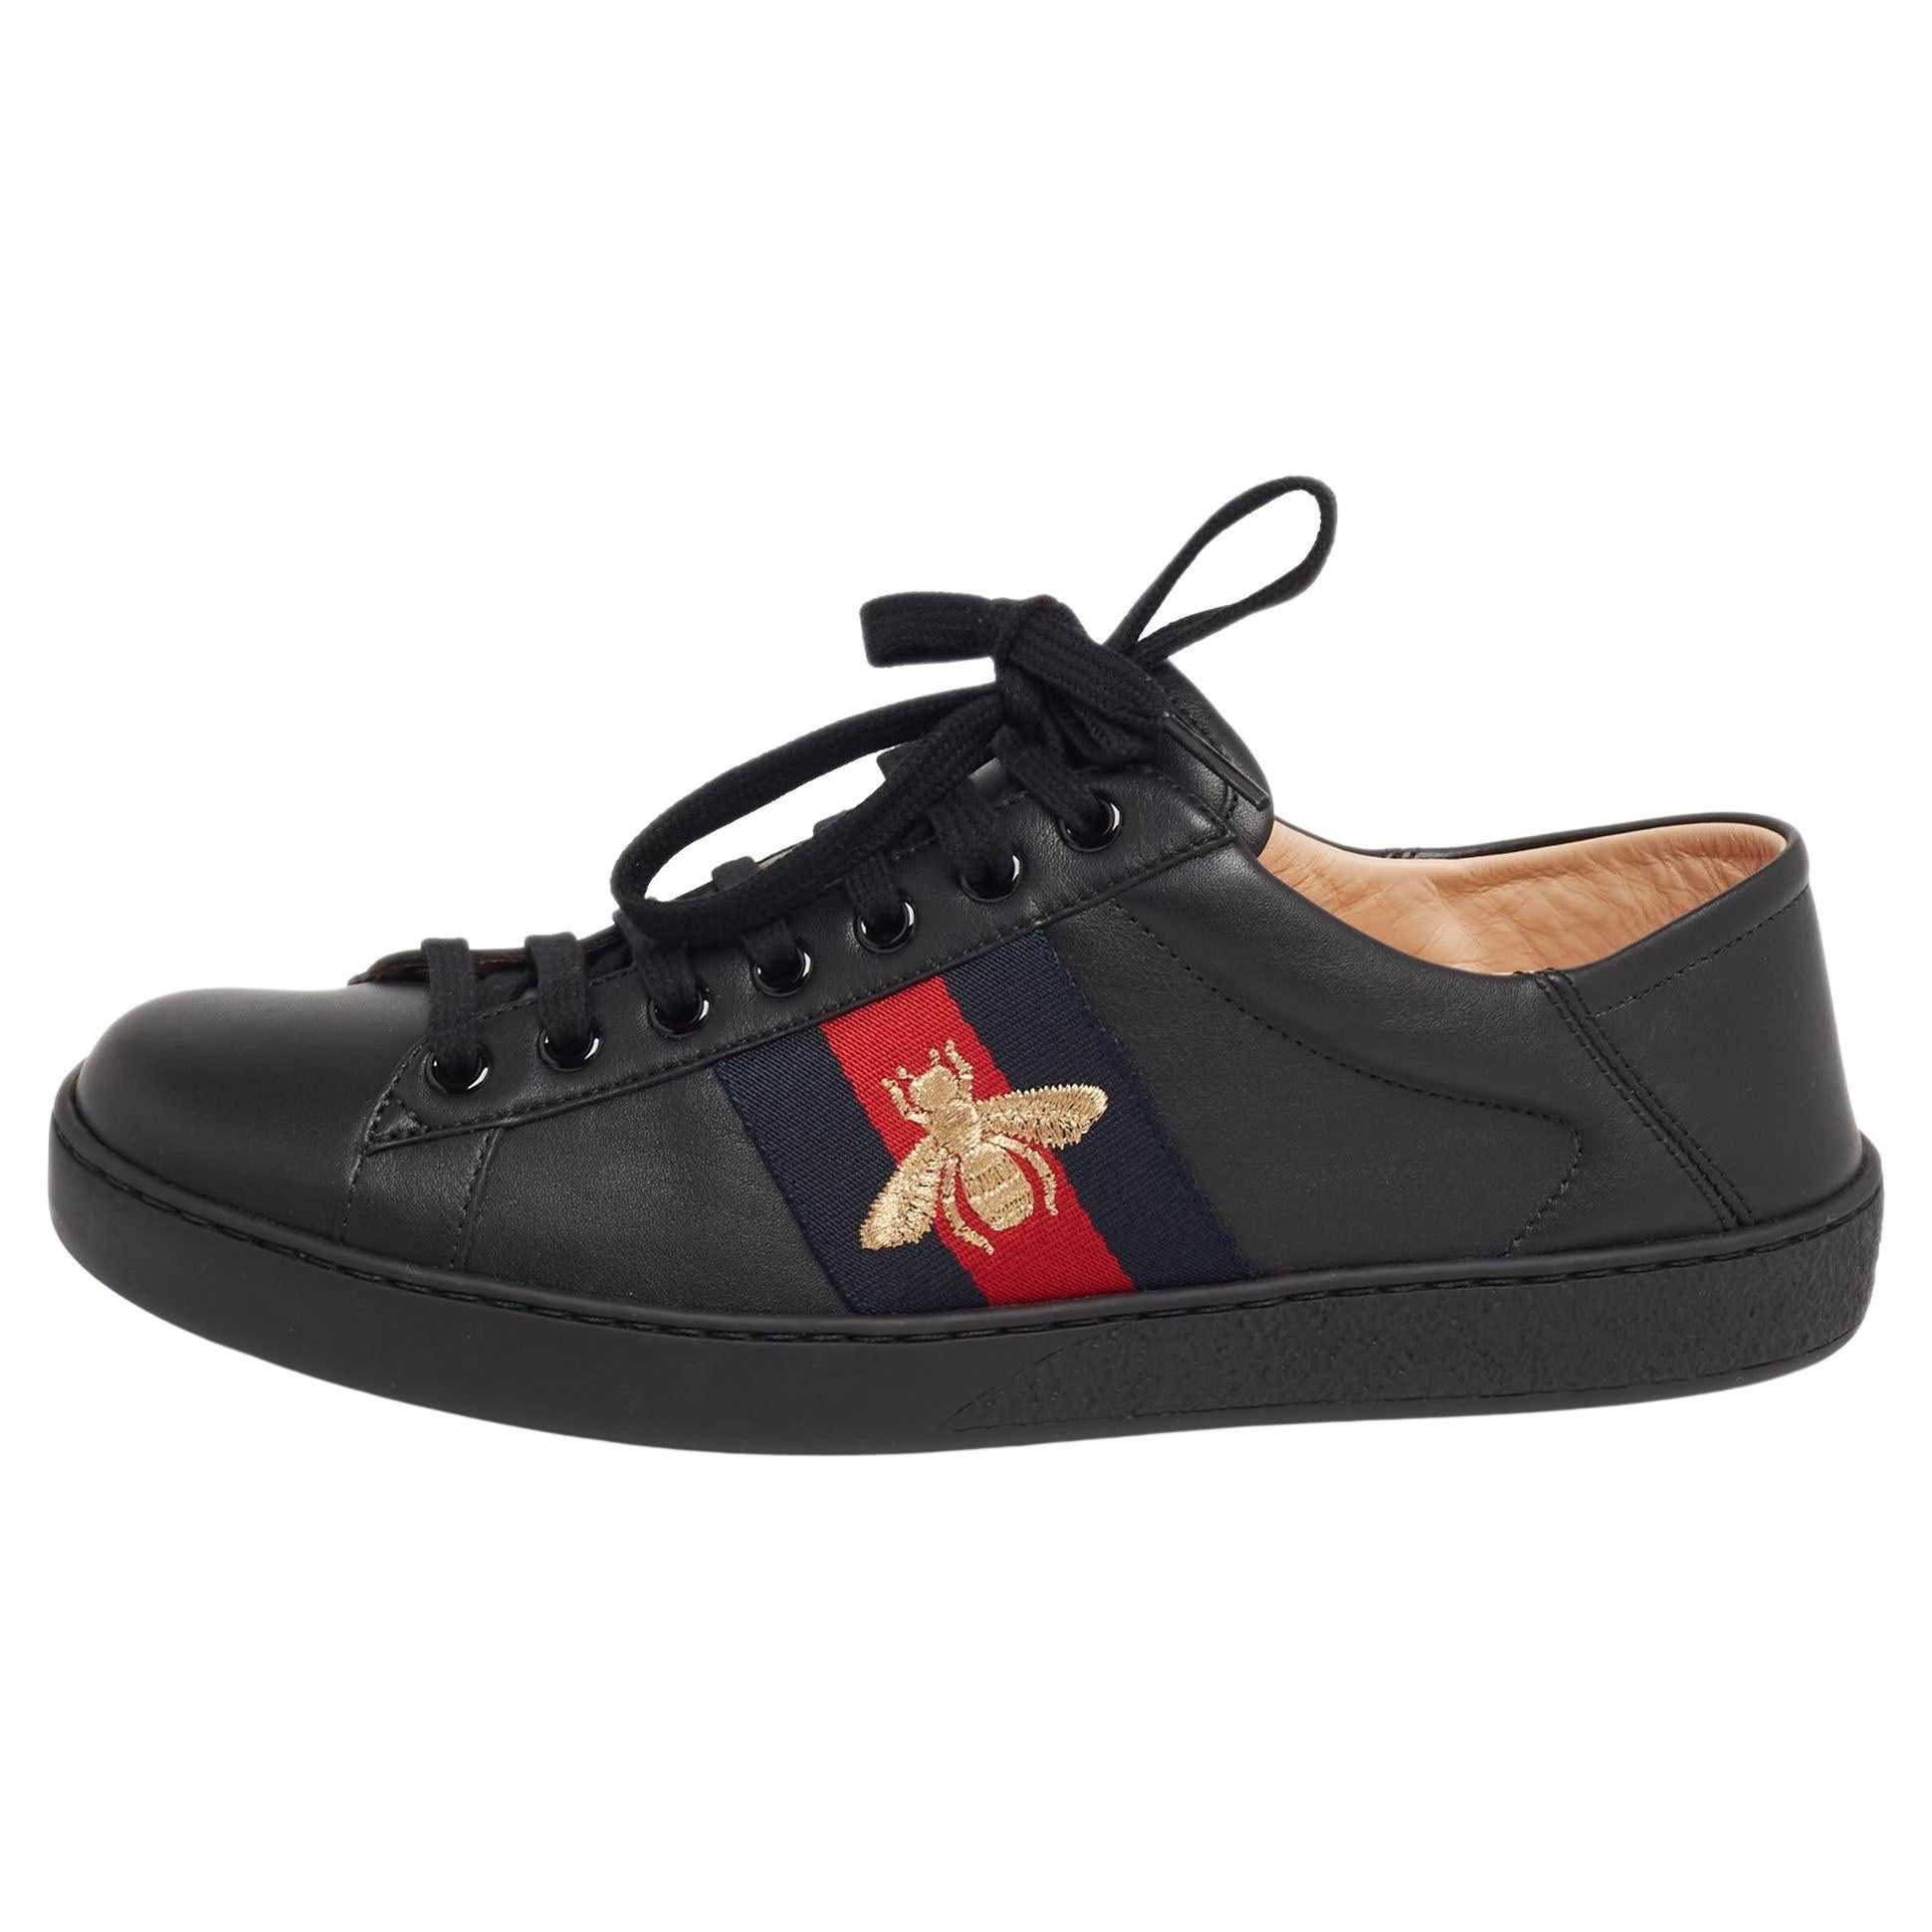 Gucci Black Leather Embroidered Bee Web Ace Low-Top Sneakers Size 40